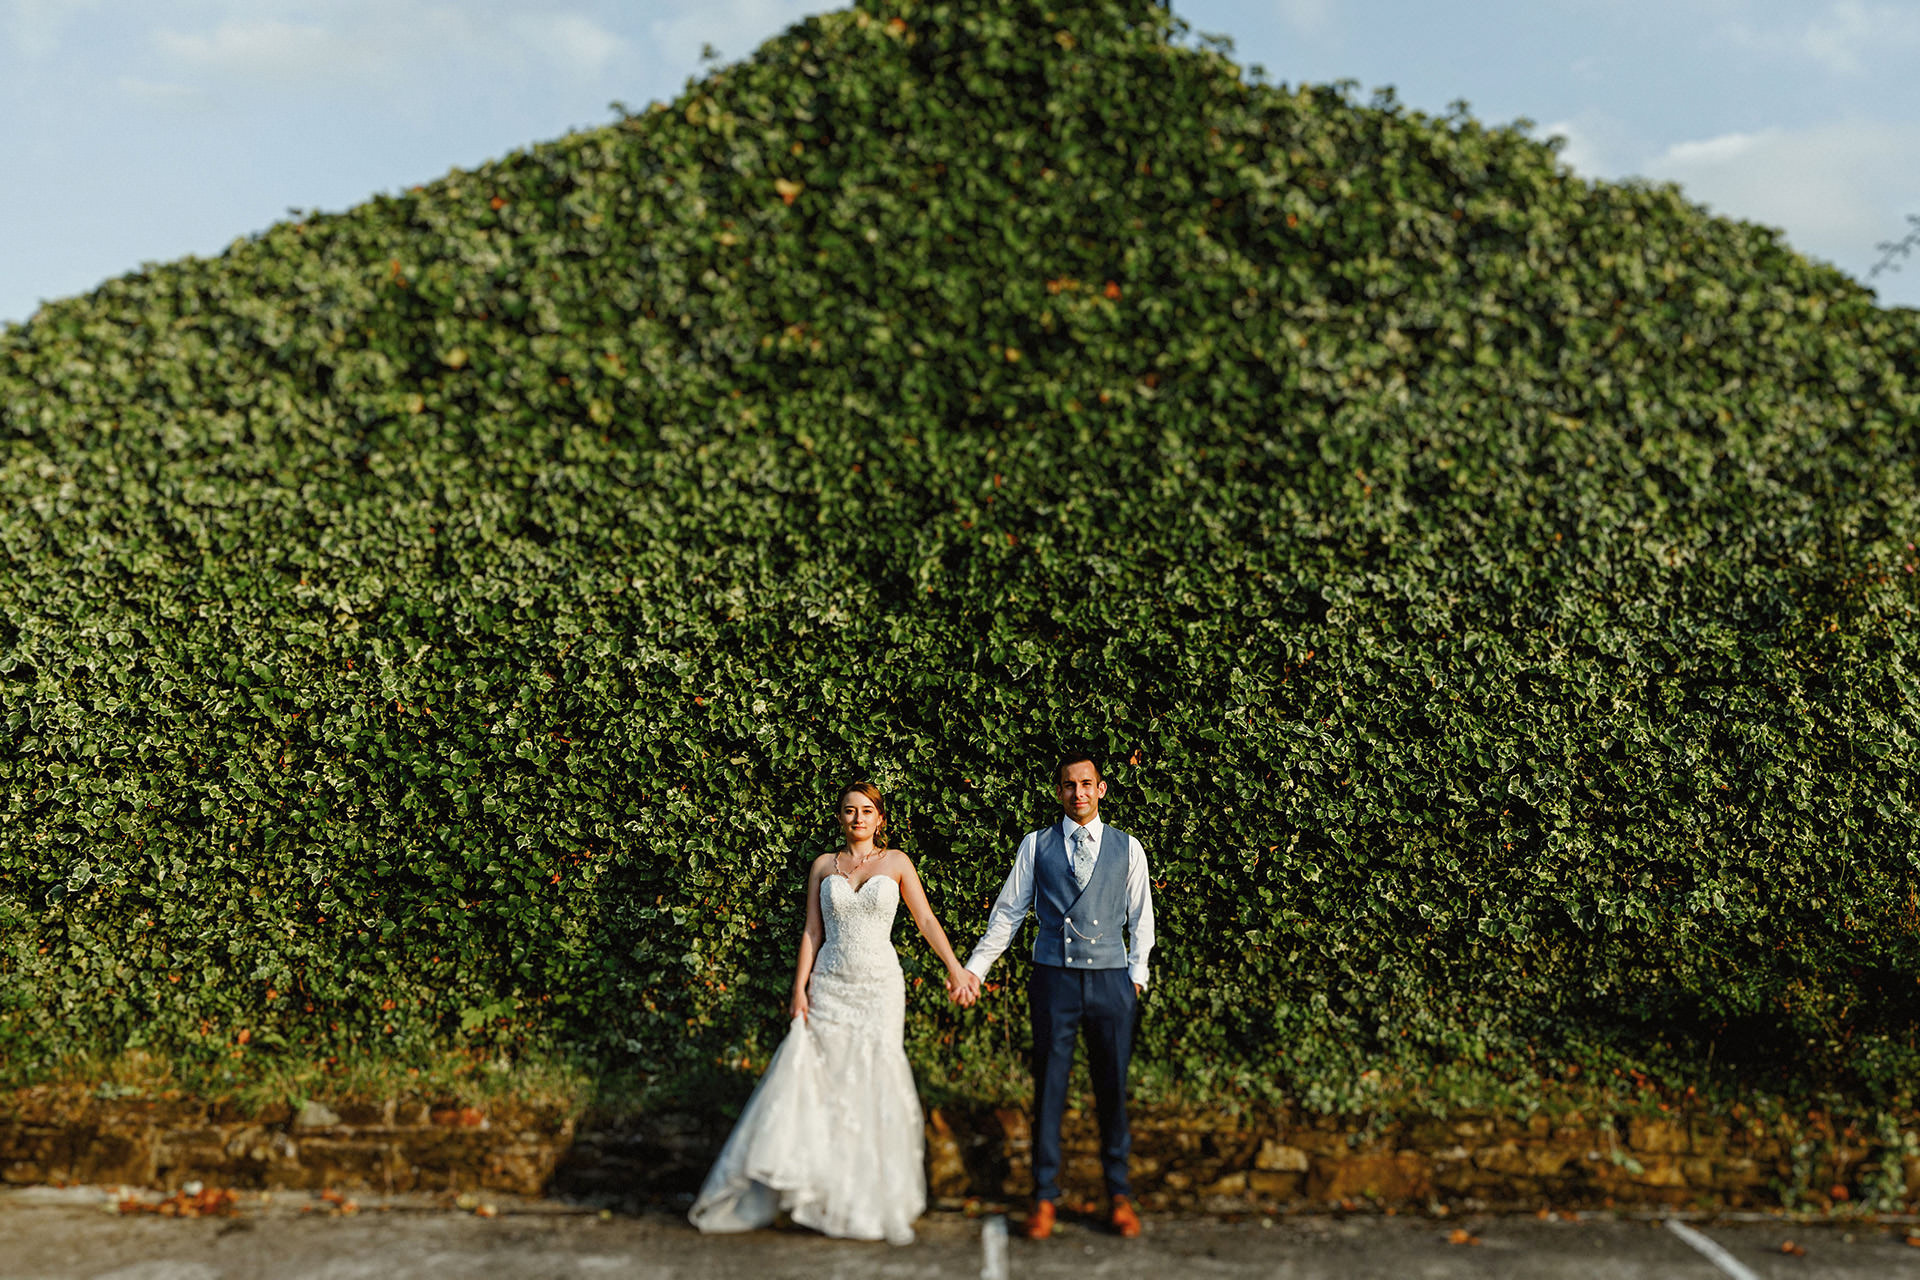 ivy covered building, wedding photo of bride and groom, tilt and shift lens